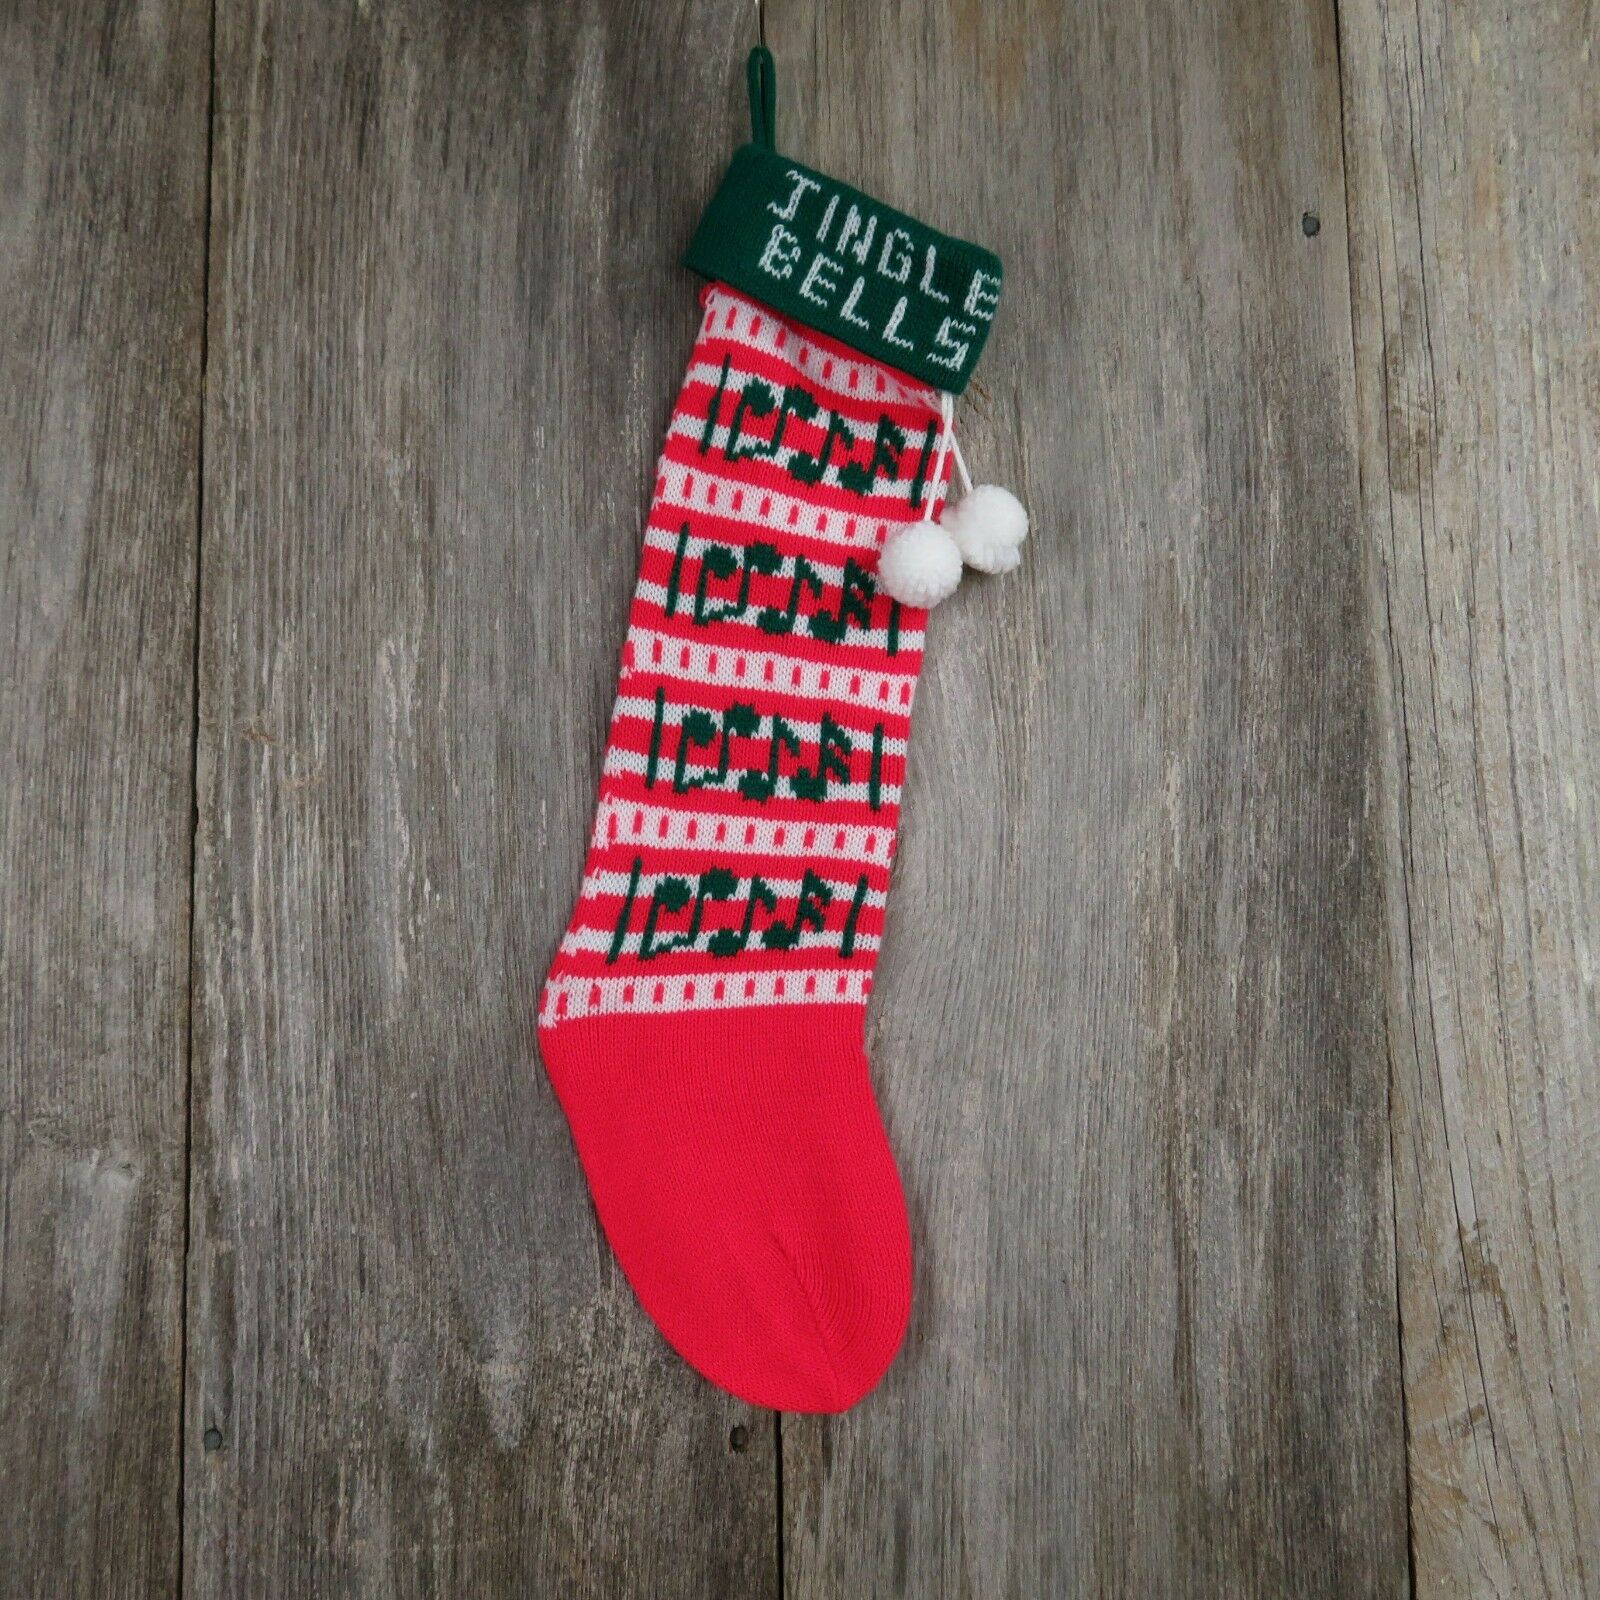 Vintage Jingle Bells Stocking Striped Christmas Knitted Knit Green Red White - At Grandma's Table